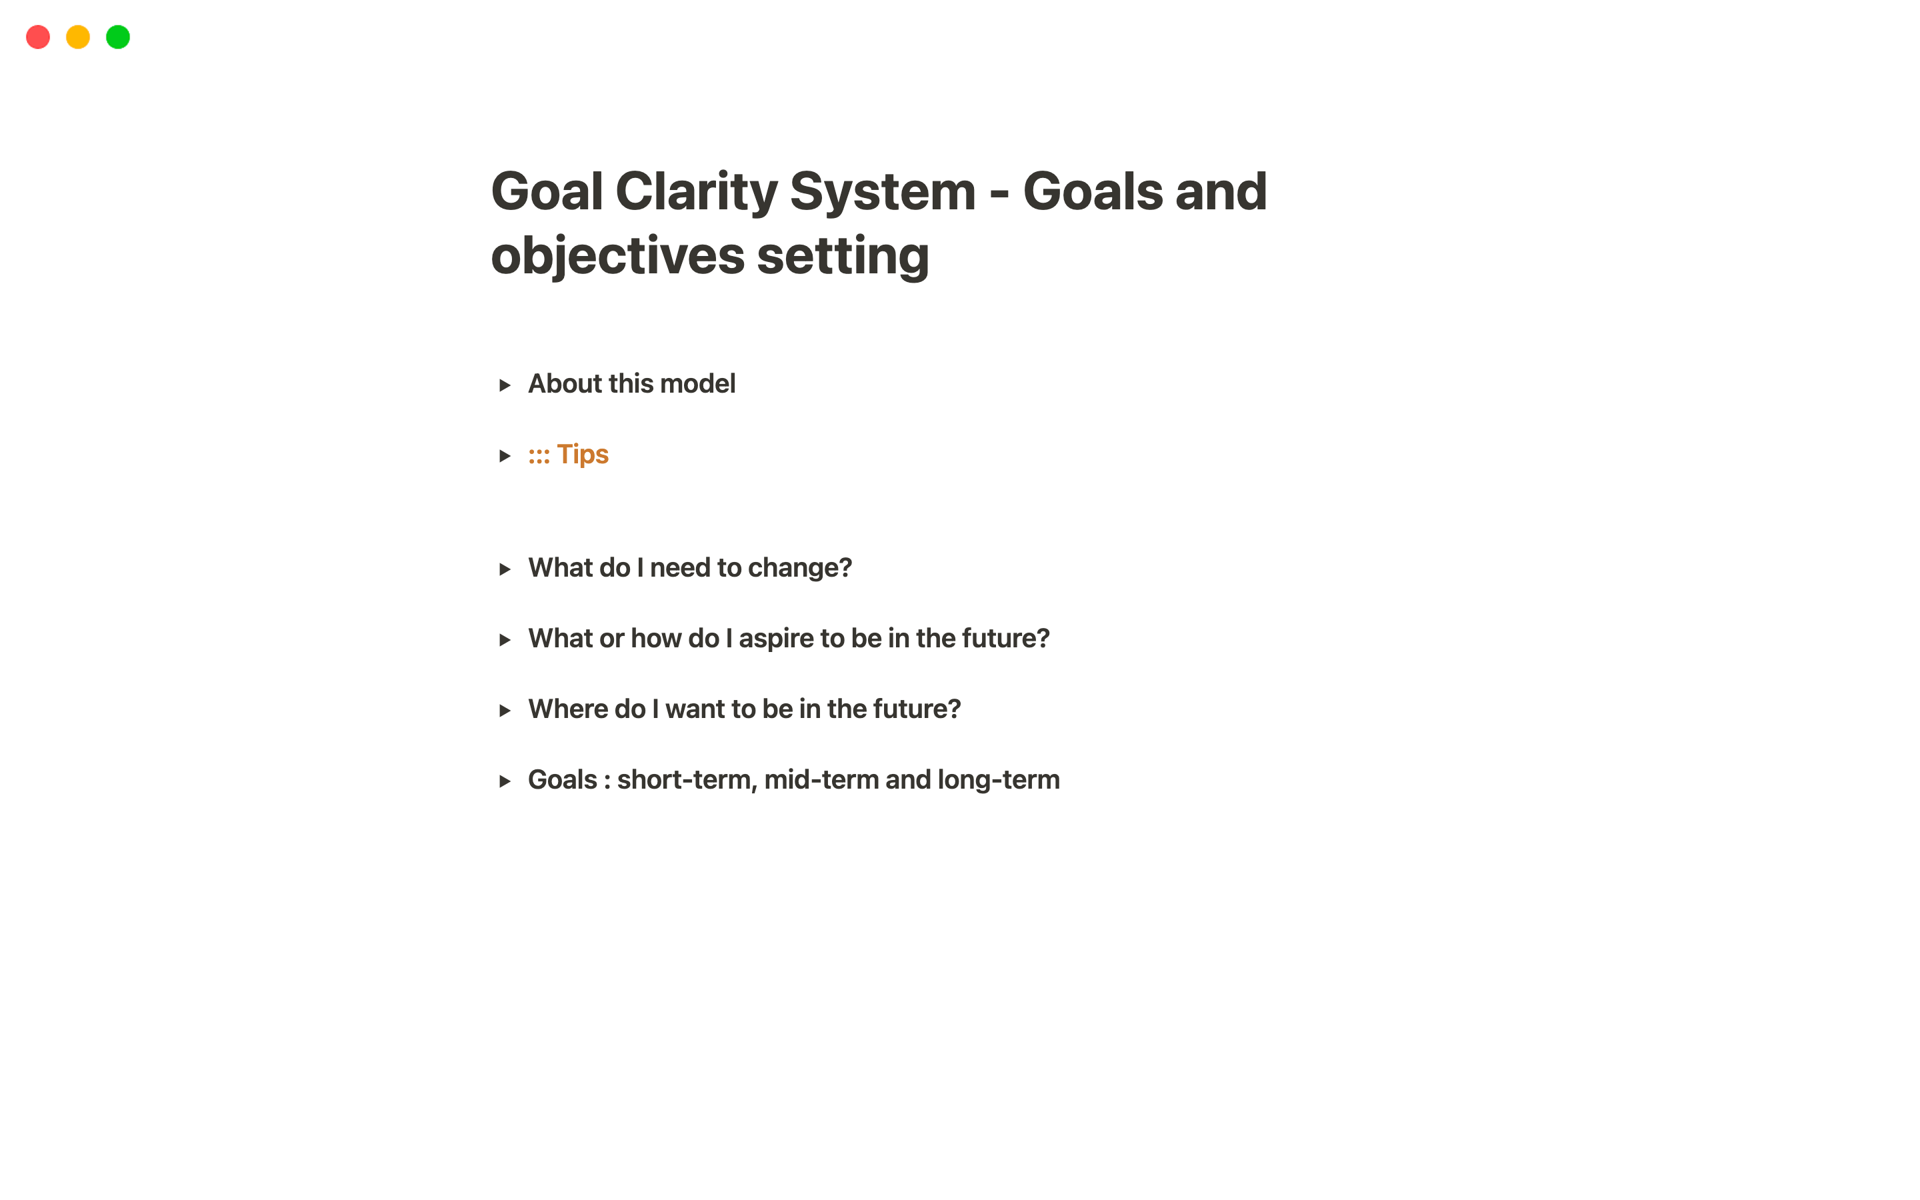 Goal Clarity System - Goals and objectives settingのテンプレートのプレビュー